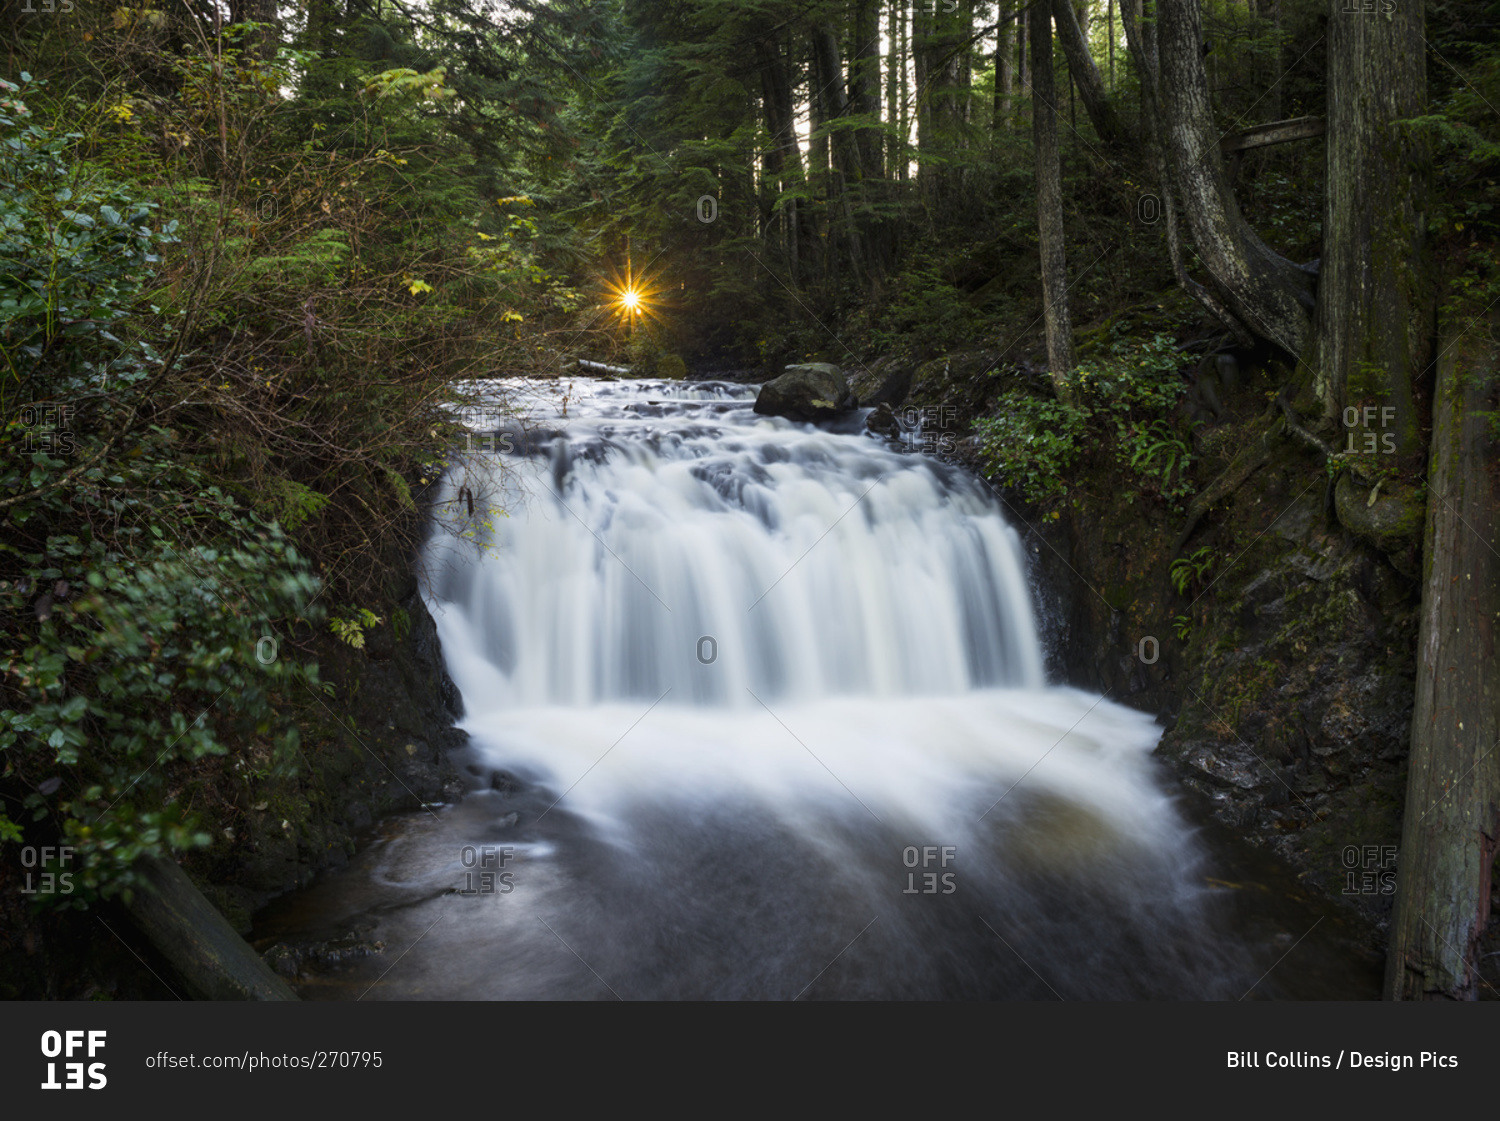 The setting sun creates a star effect shining through the treas above Rolley Falls, Rolley Lake Provincial Park in the Stave Falls area, Mission, British Columbia, Canada